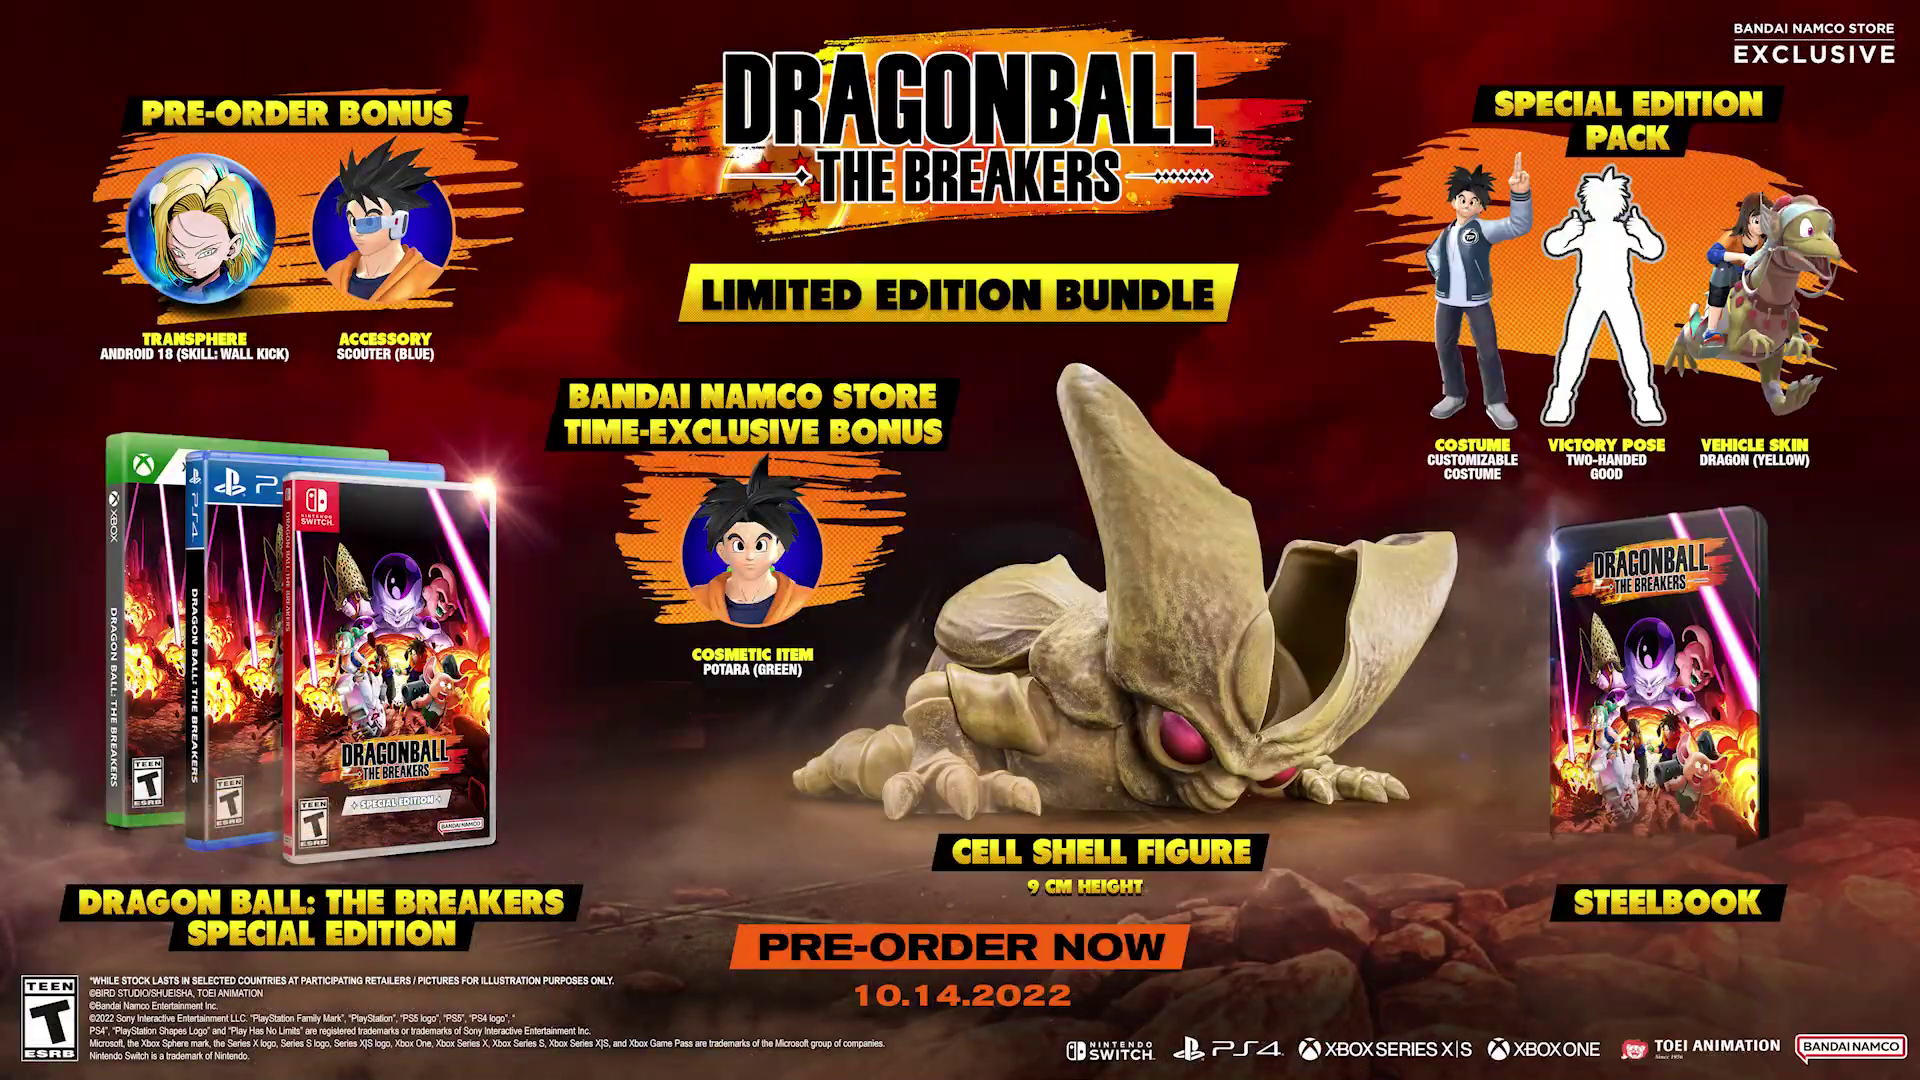 Dragon Ball: The Breakers Achievement Guide & Road Map